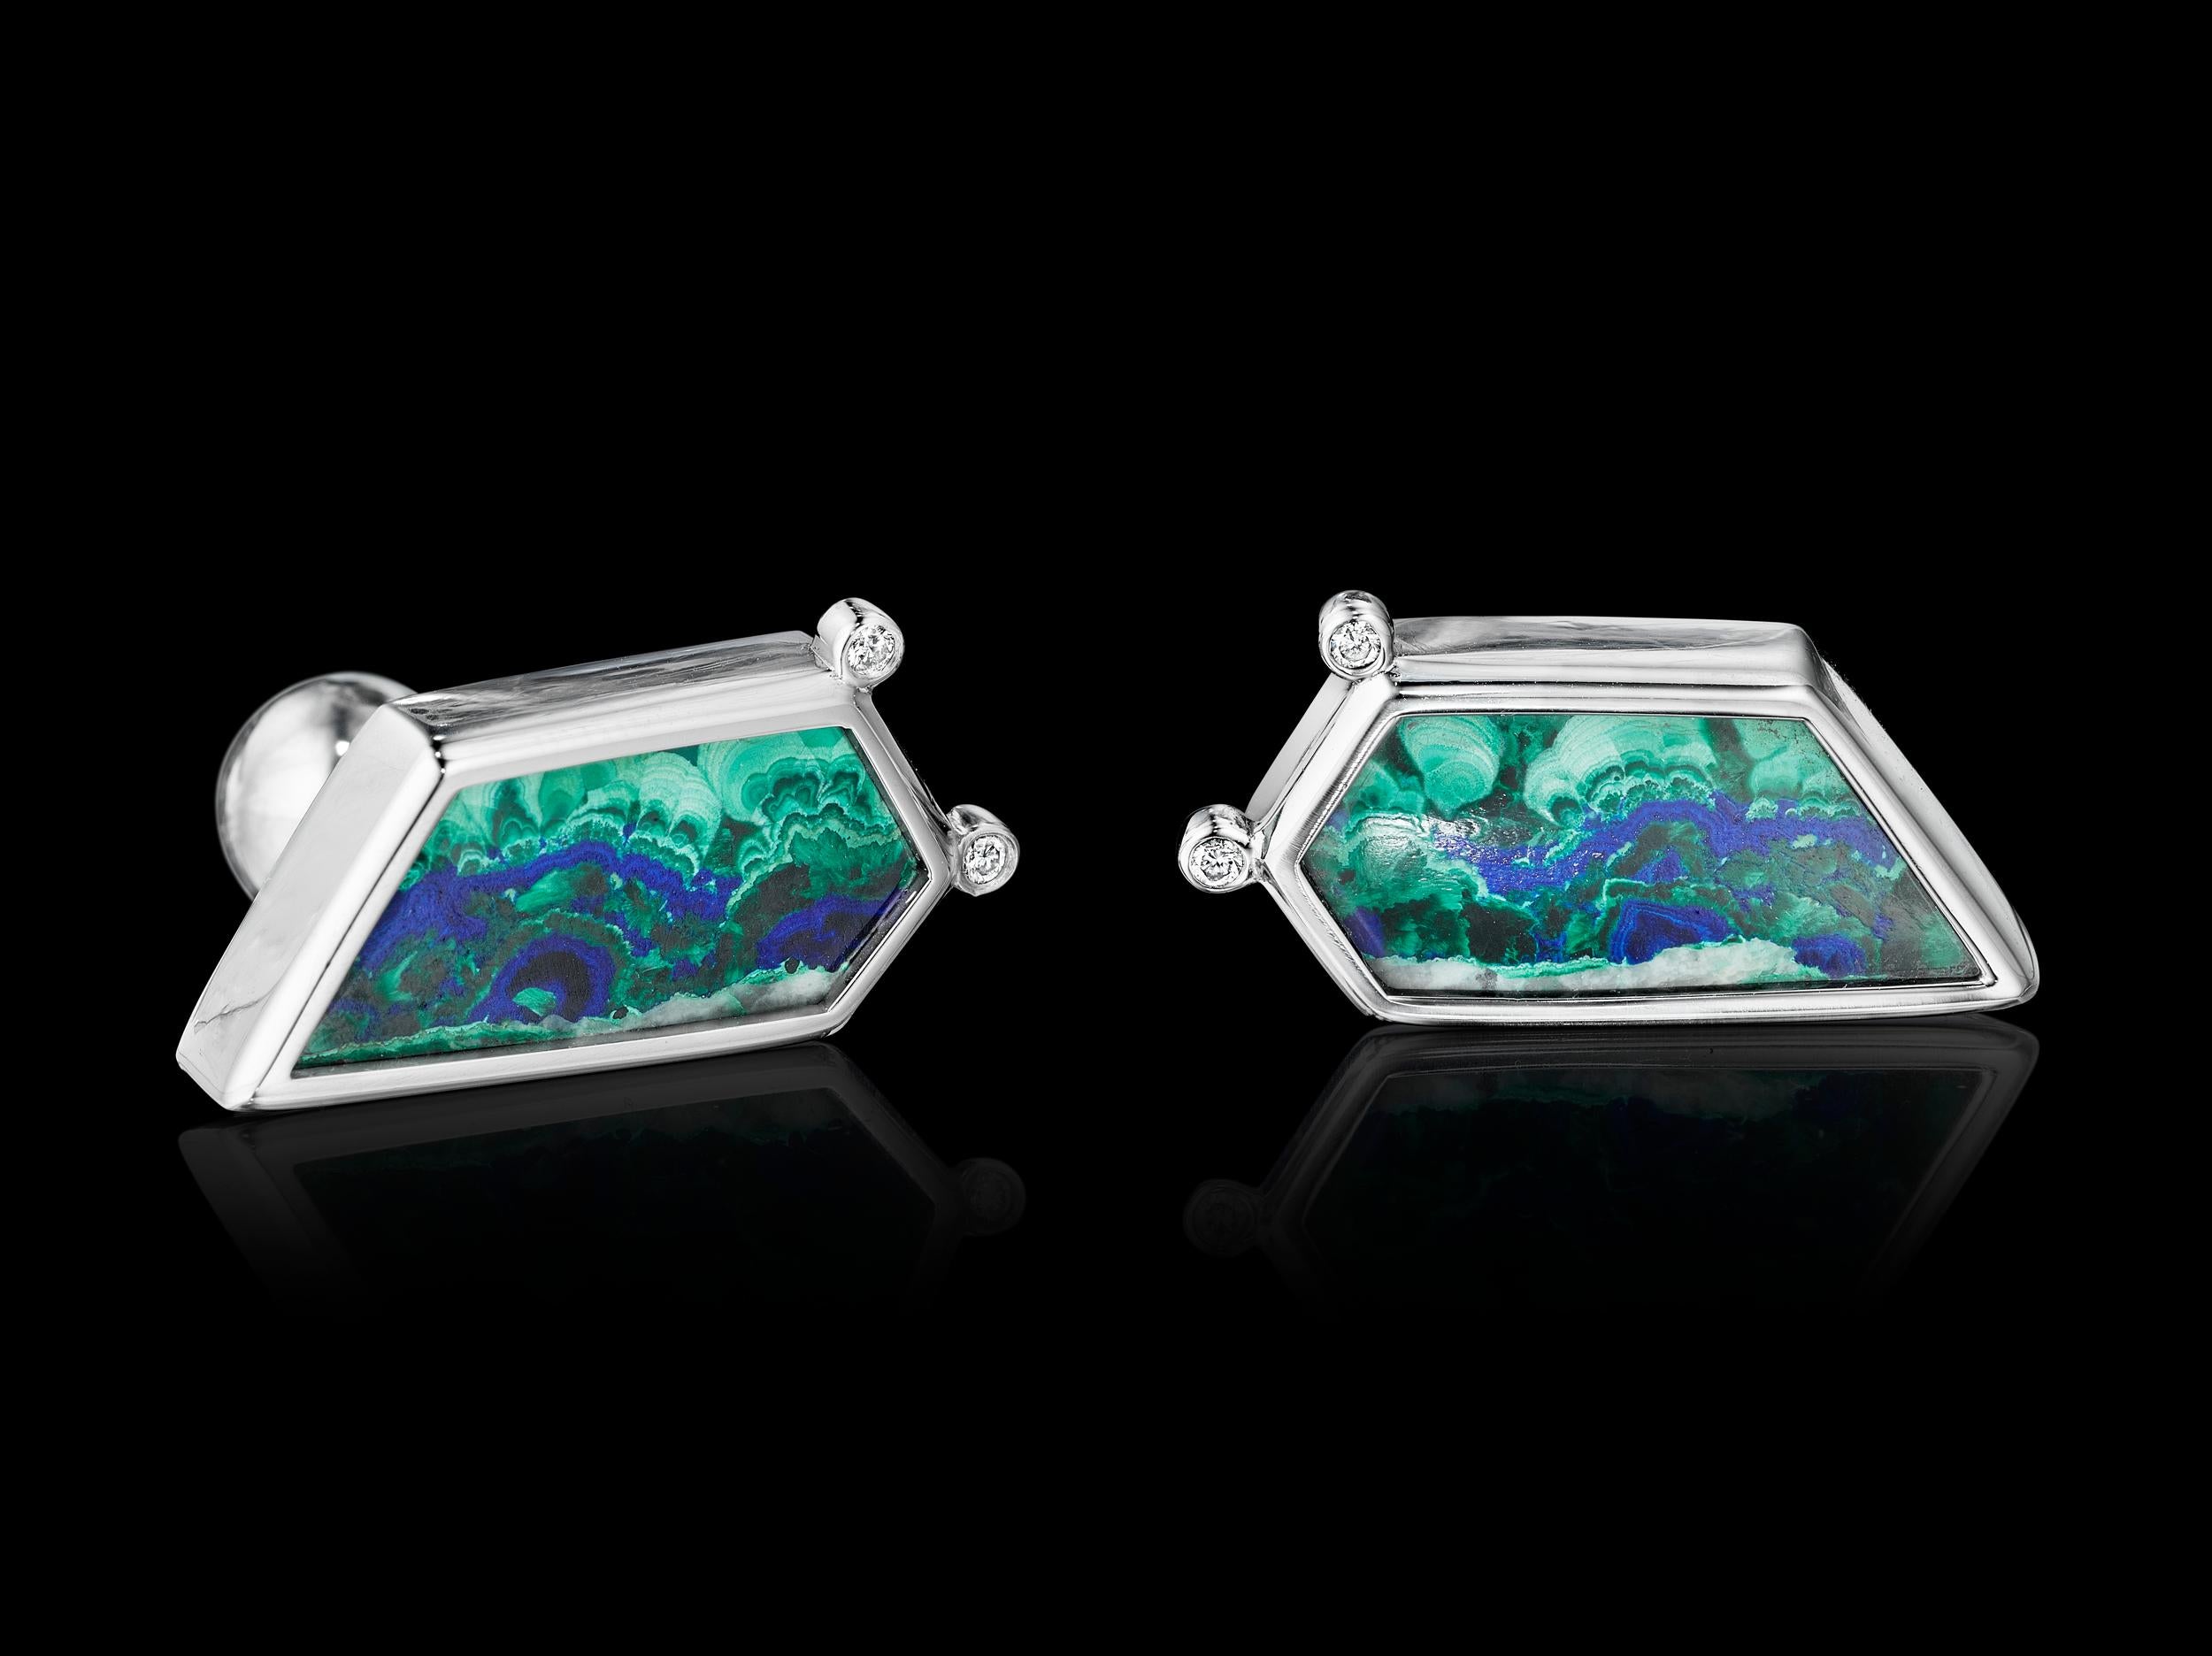 One-of-a-kind Platinum Cufflinks YOKI design, features Diamond (0.1cts. approx.) and Azurite Malachite 1(14.7cts approx.) set in Platinum. 

Dimensions: 2.9mm face length x 1.3mm face width (approximately)

Style: Cufflinks: Ball return back

This